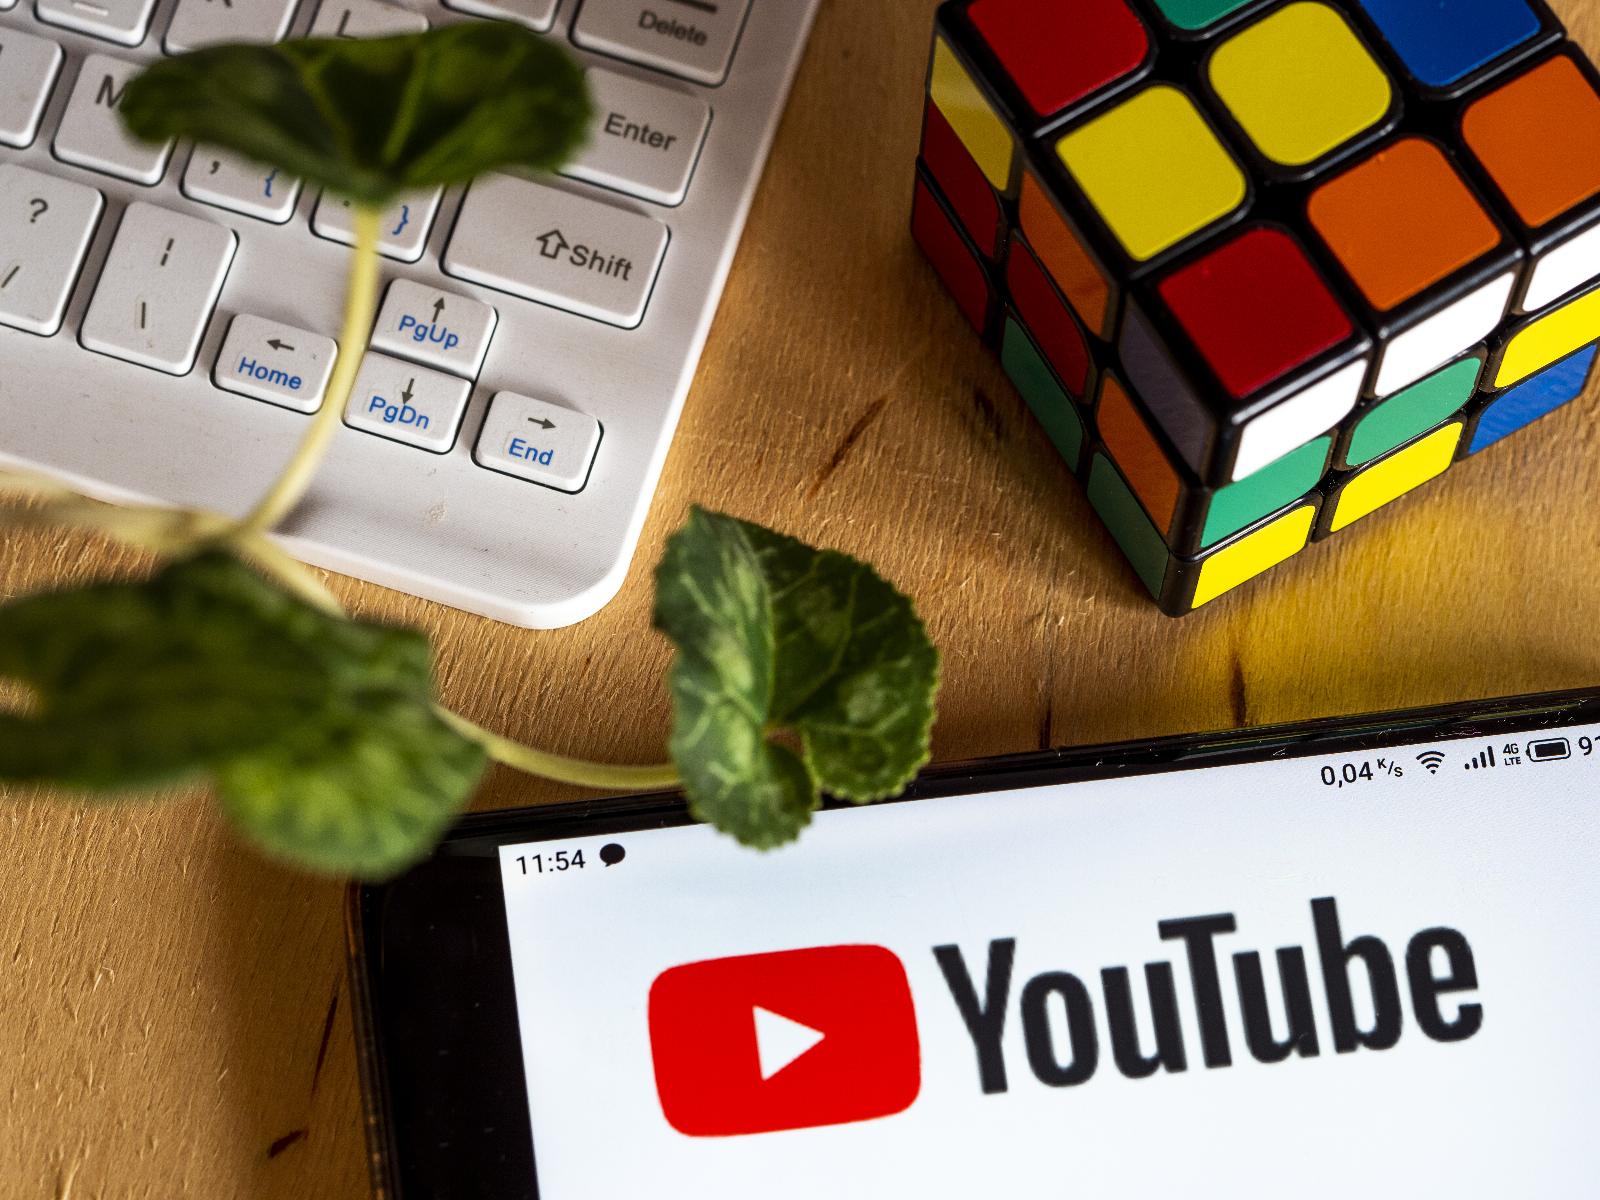 YouTube continues to see ad revenue decline, 2.6% drop YOY